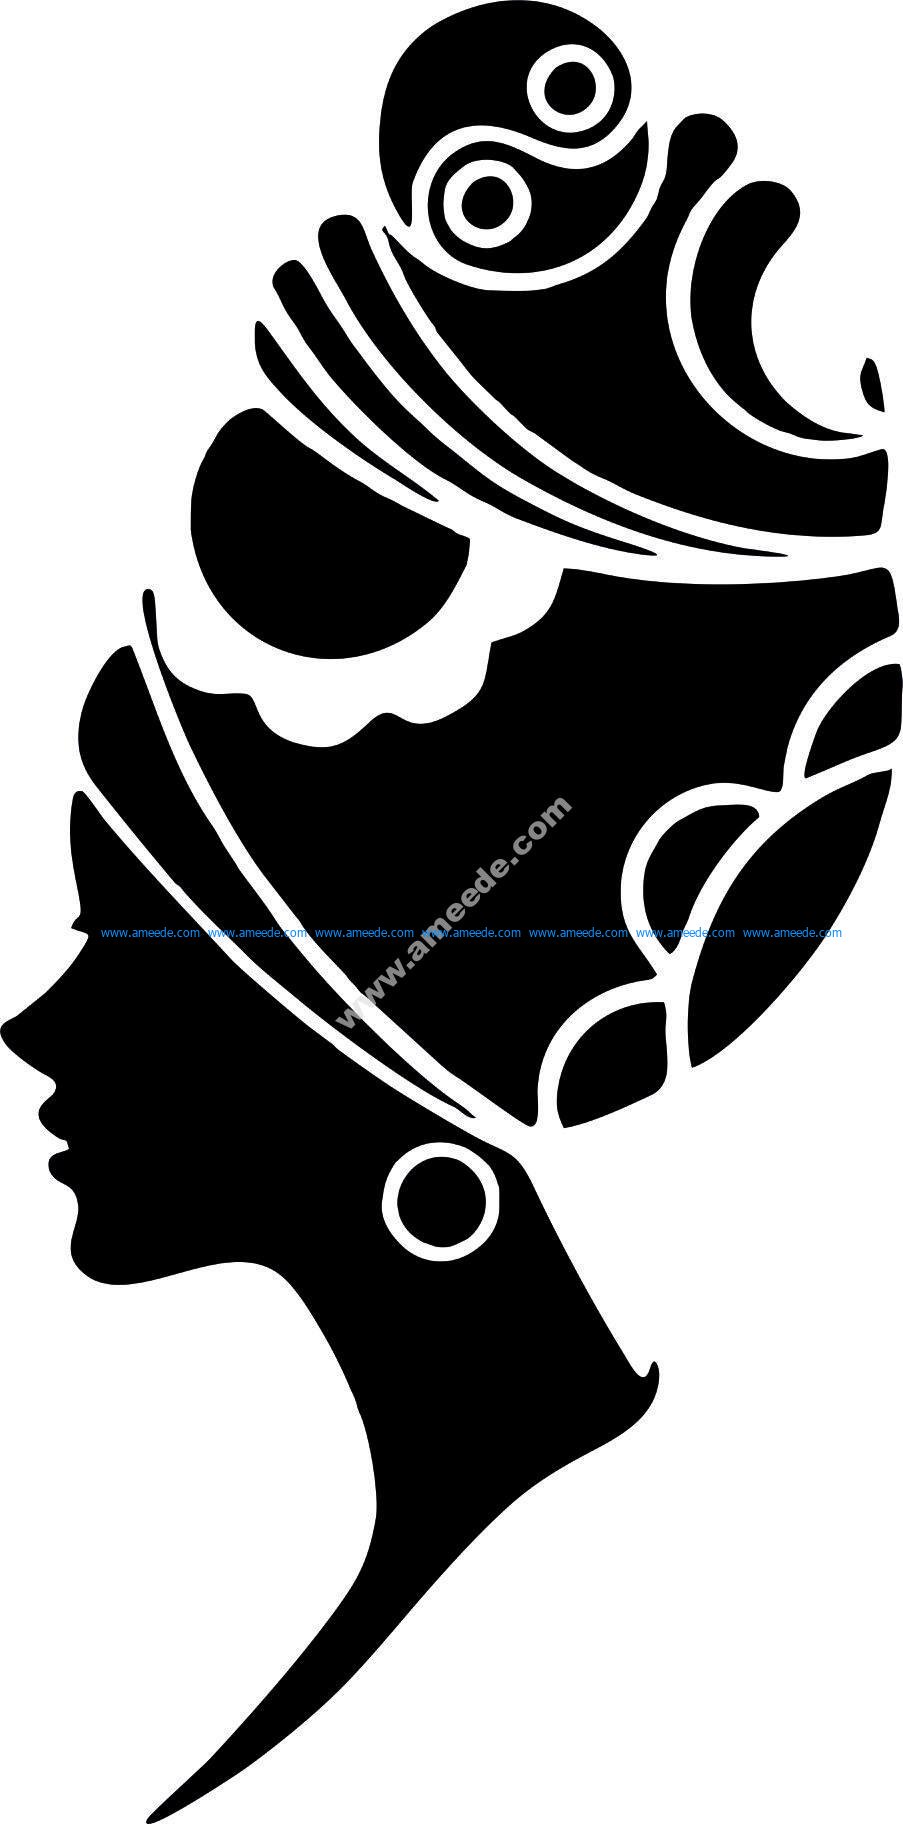 Download Woman Face Silhouette Vector Art jpg Image - Download Free Vector